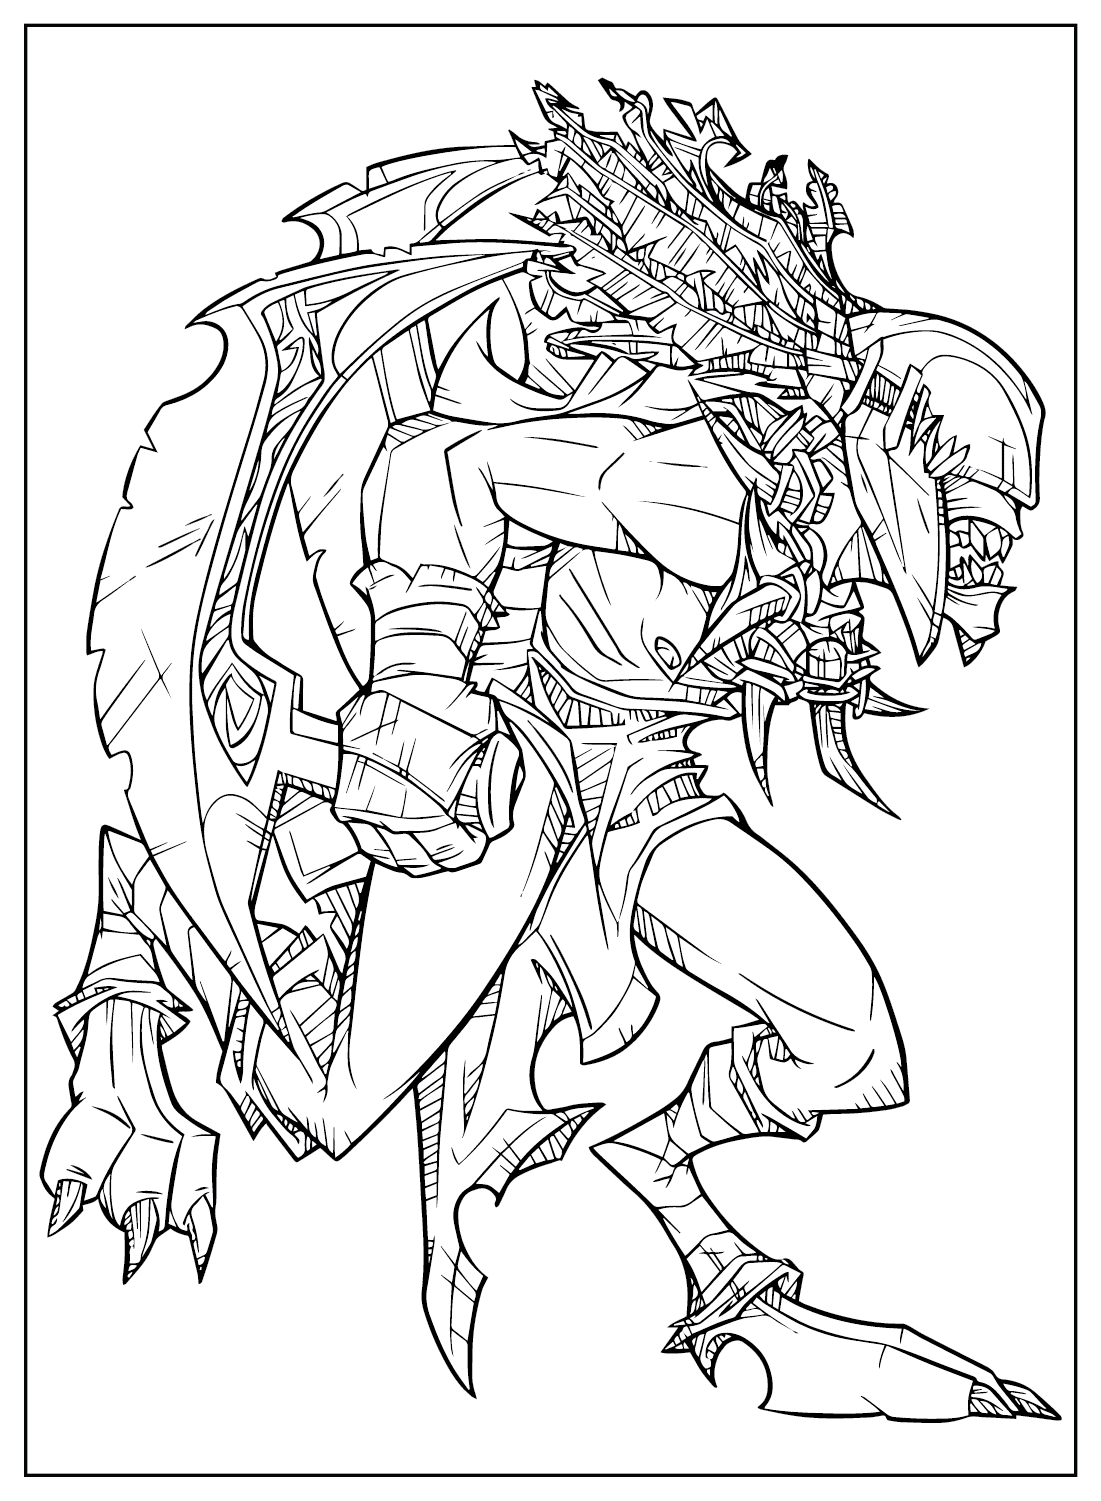 Bloodseeker Dota 2 Coloring Page from Dota 2